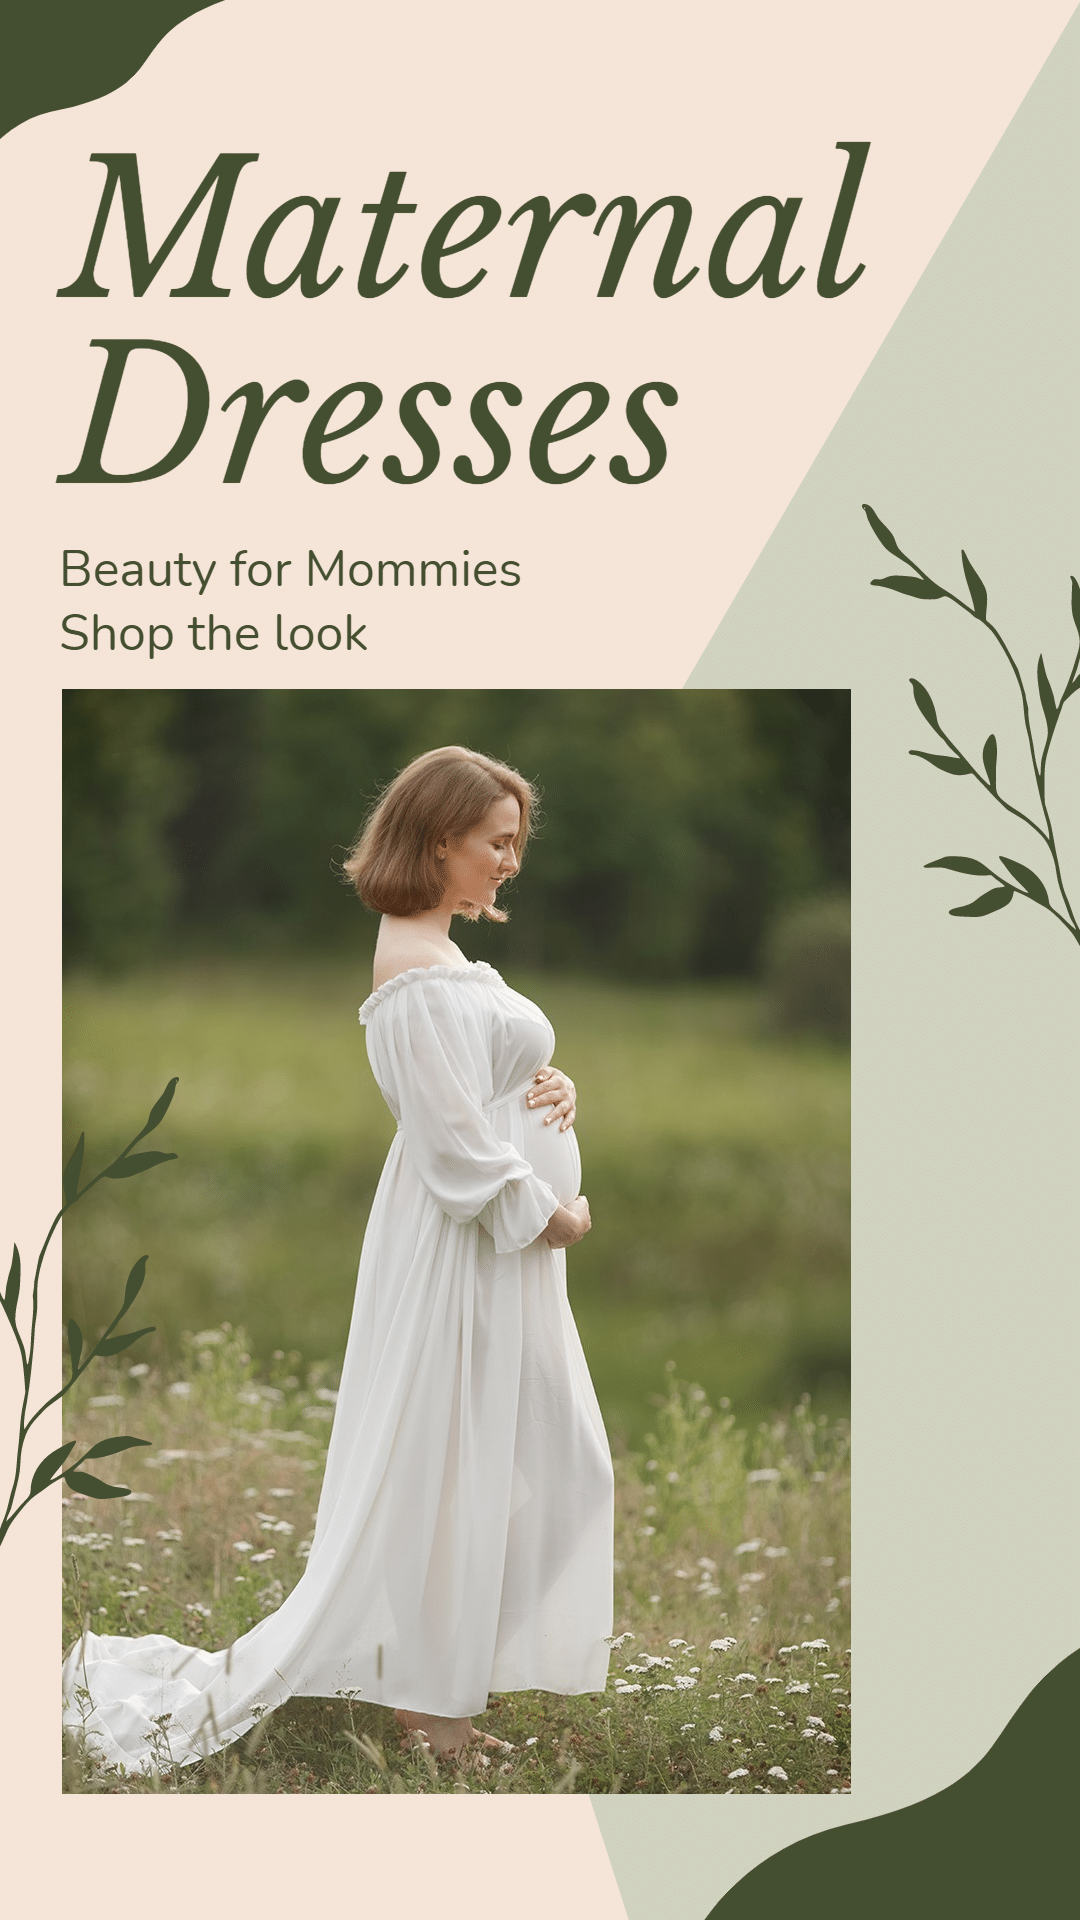 Green Block Element Fresh Style Maternal Dresses Outfit Display Ecommerce Story